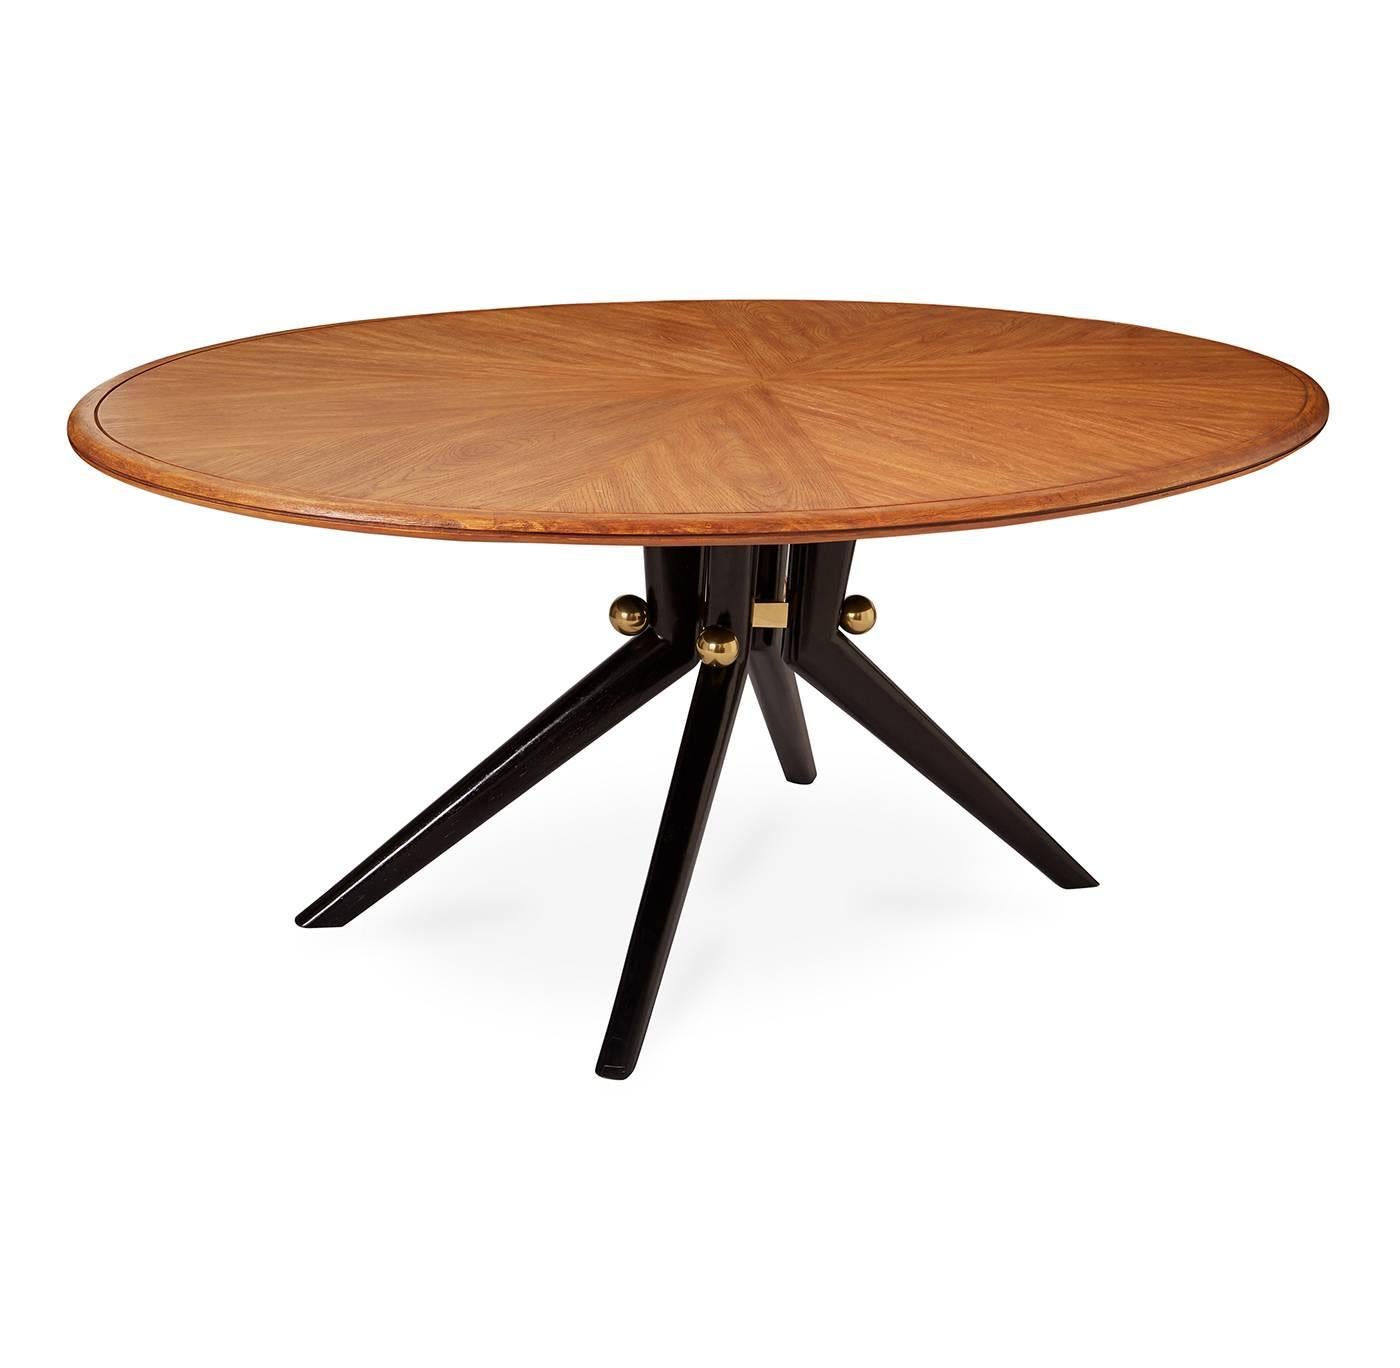 Divine dining. A sculptural splayed leg base with brass spheres supports an oval, honeyed wood top that has been wire brushed in a radial pattern to showcase the natural grain. The slight, Scandinavian style distressing of the top makes it extra